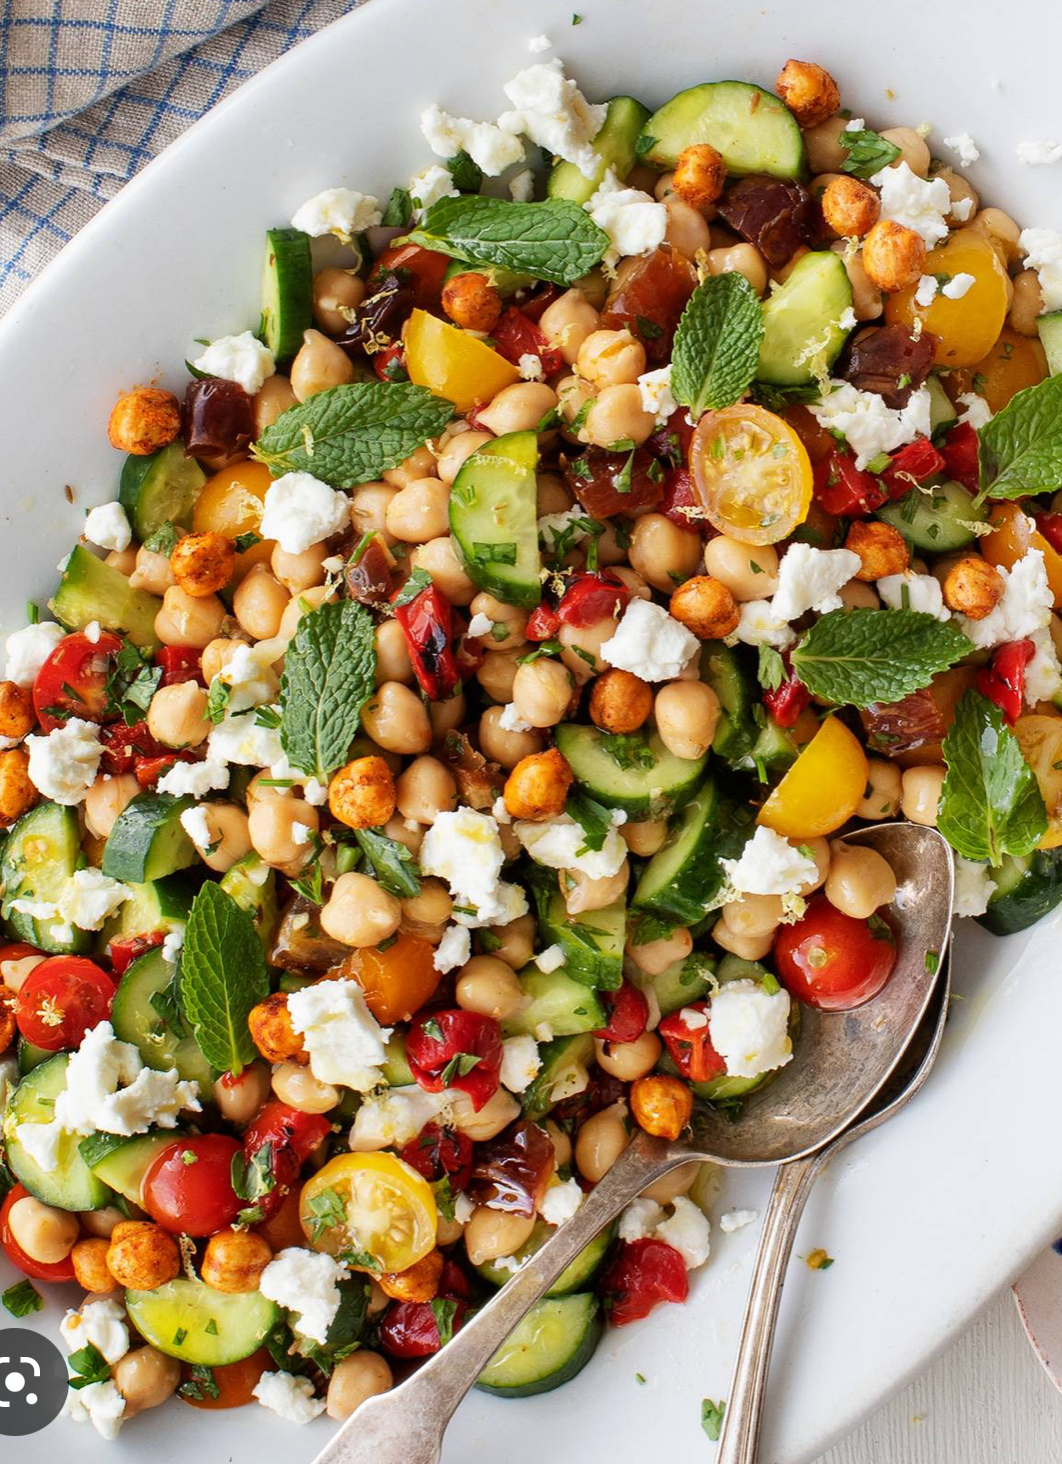 A color photo of a white platter filled with a salad made from chickpeas, cucumber, tomato, feta cheese and mint.